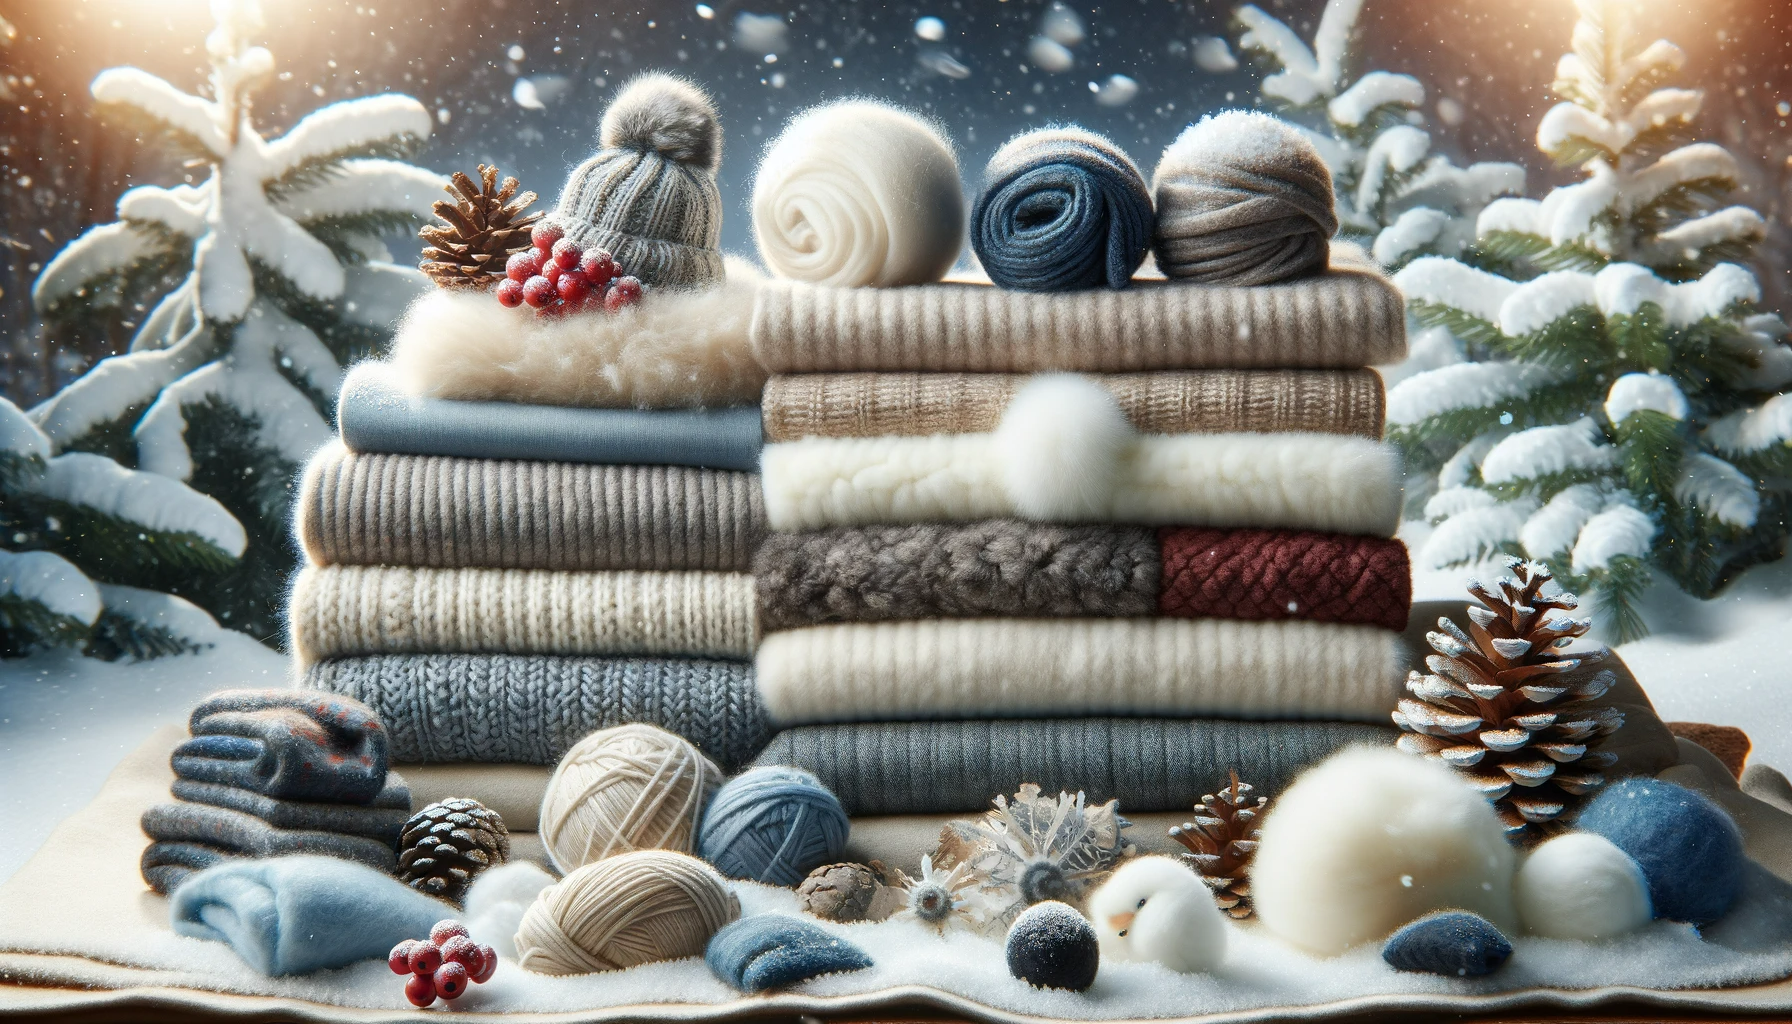 Winter Fabric Guide: The 10 Best Fabrics For Cold Weather